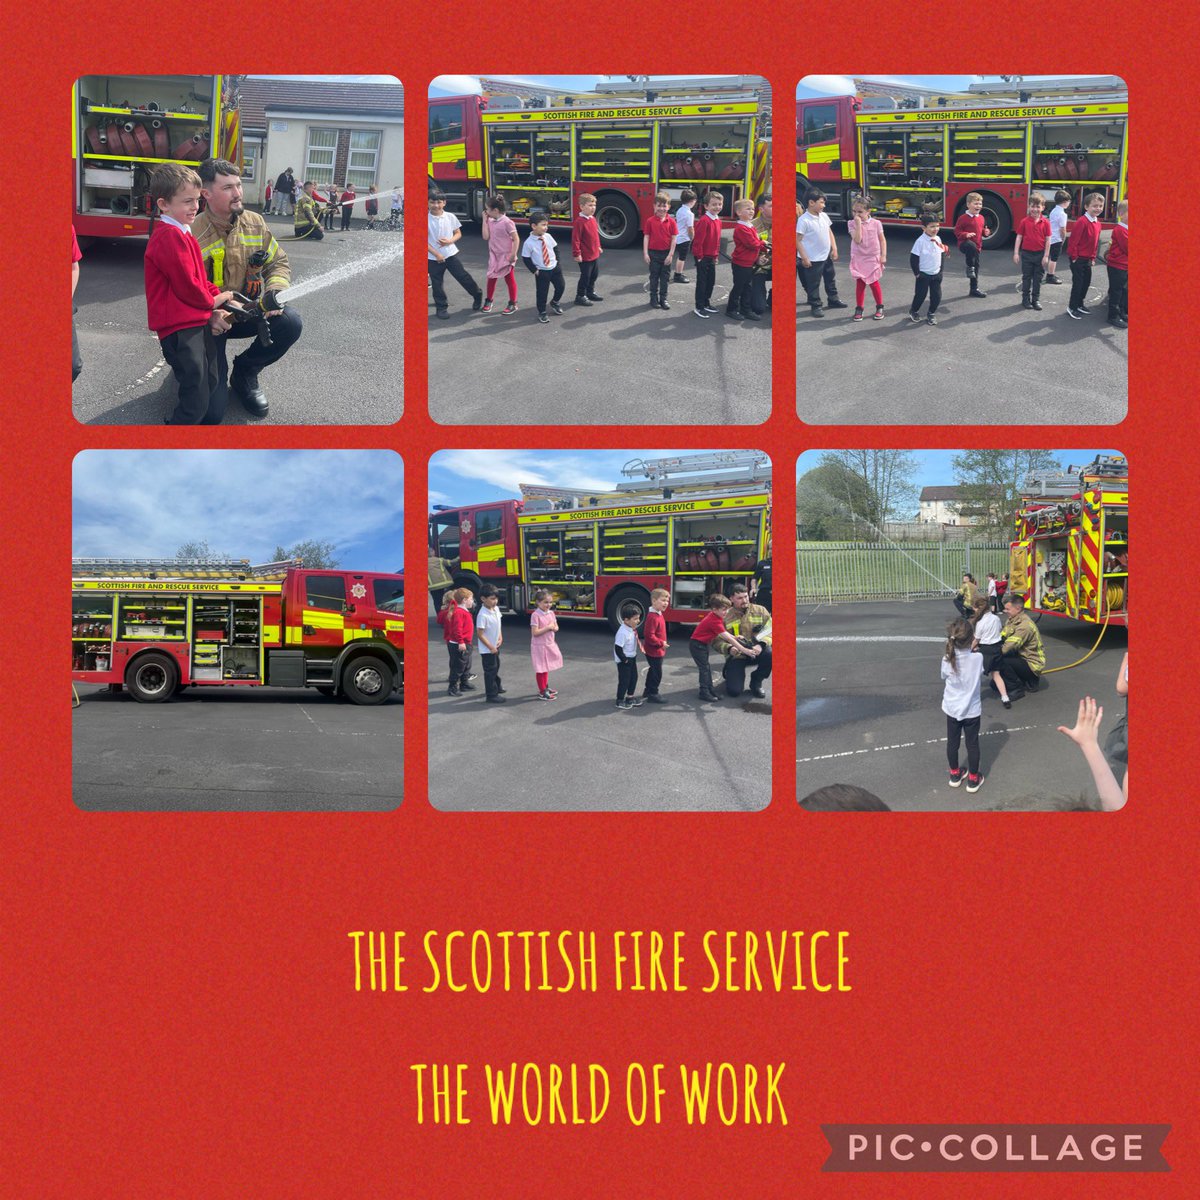 Primary one absolutely loved the @Scotfire_ENSA as we continue WoW week!! Well done you guys! #worldofwork #collaboration #emergencyservices 🚒